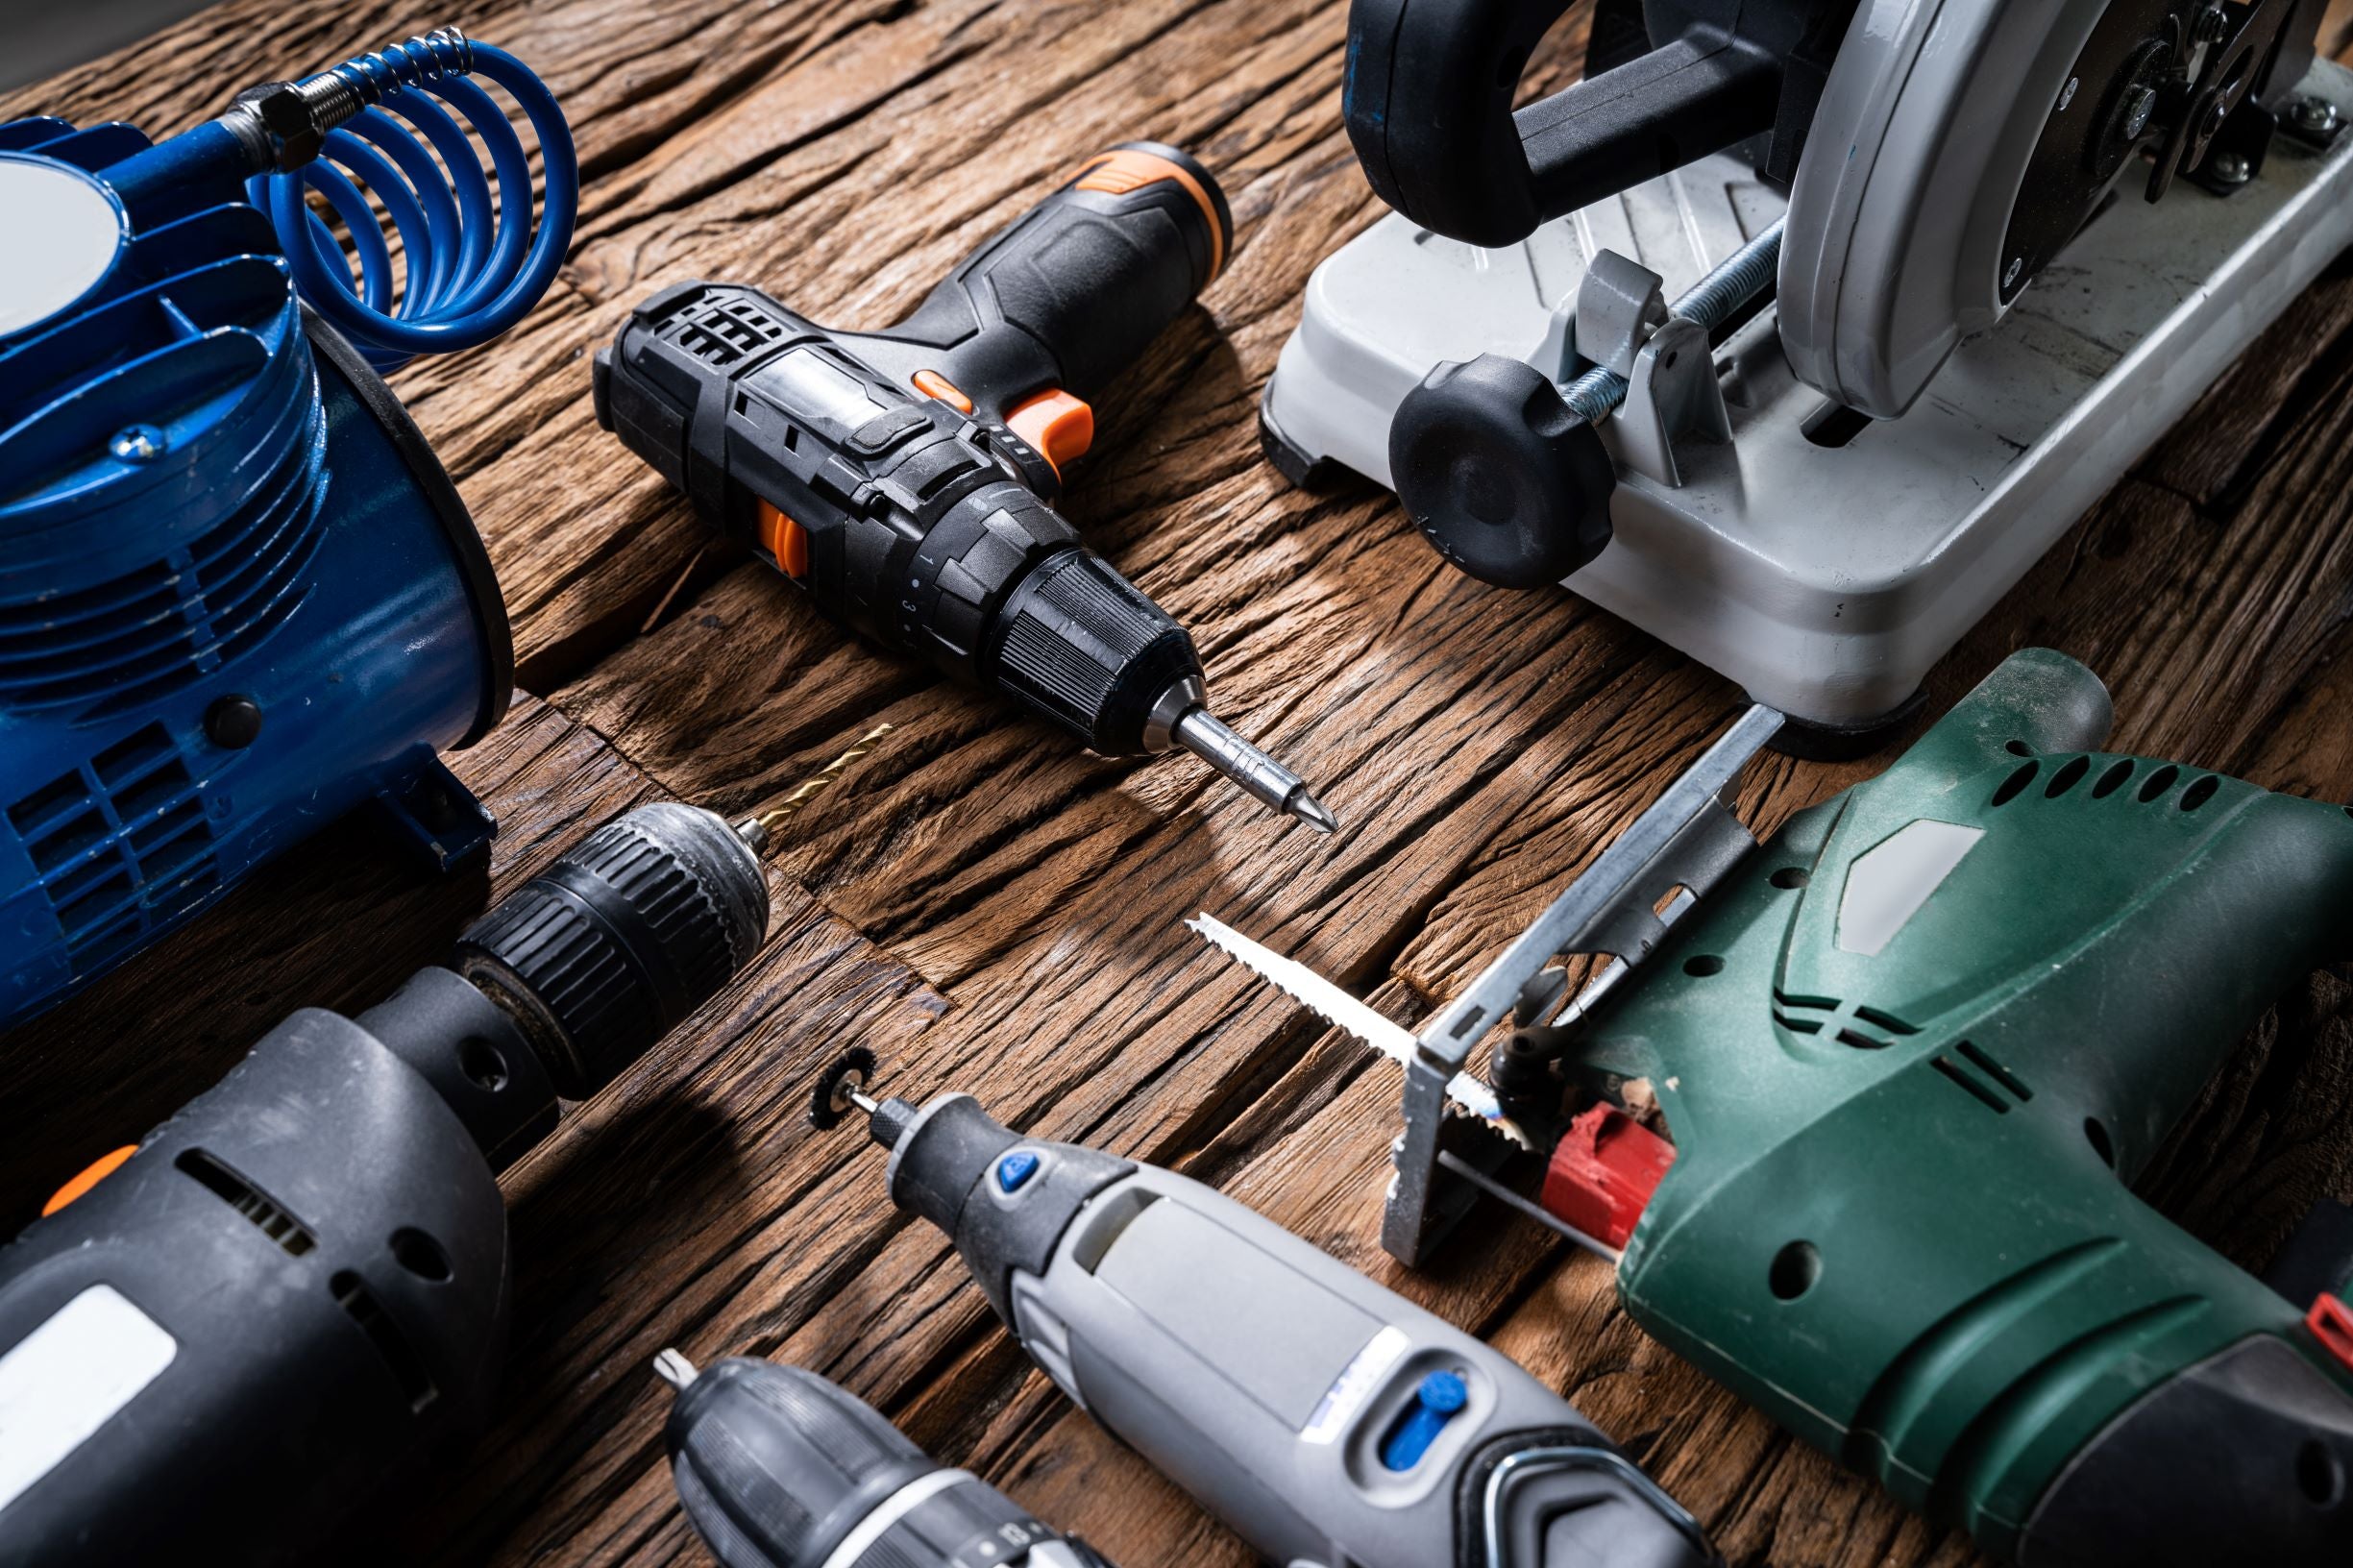 Several power tools for building laying on wooden floor.